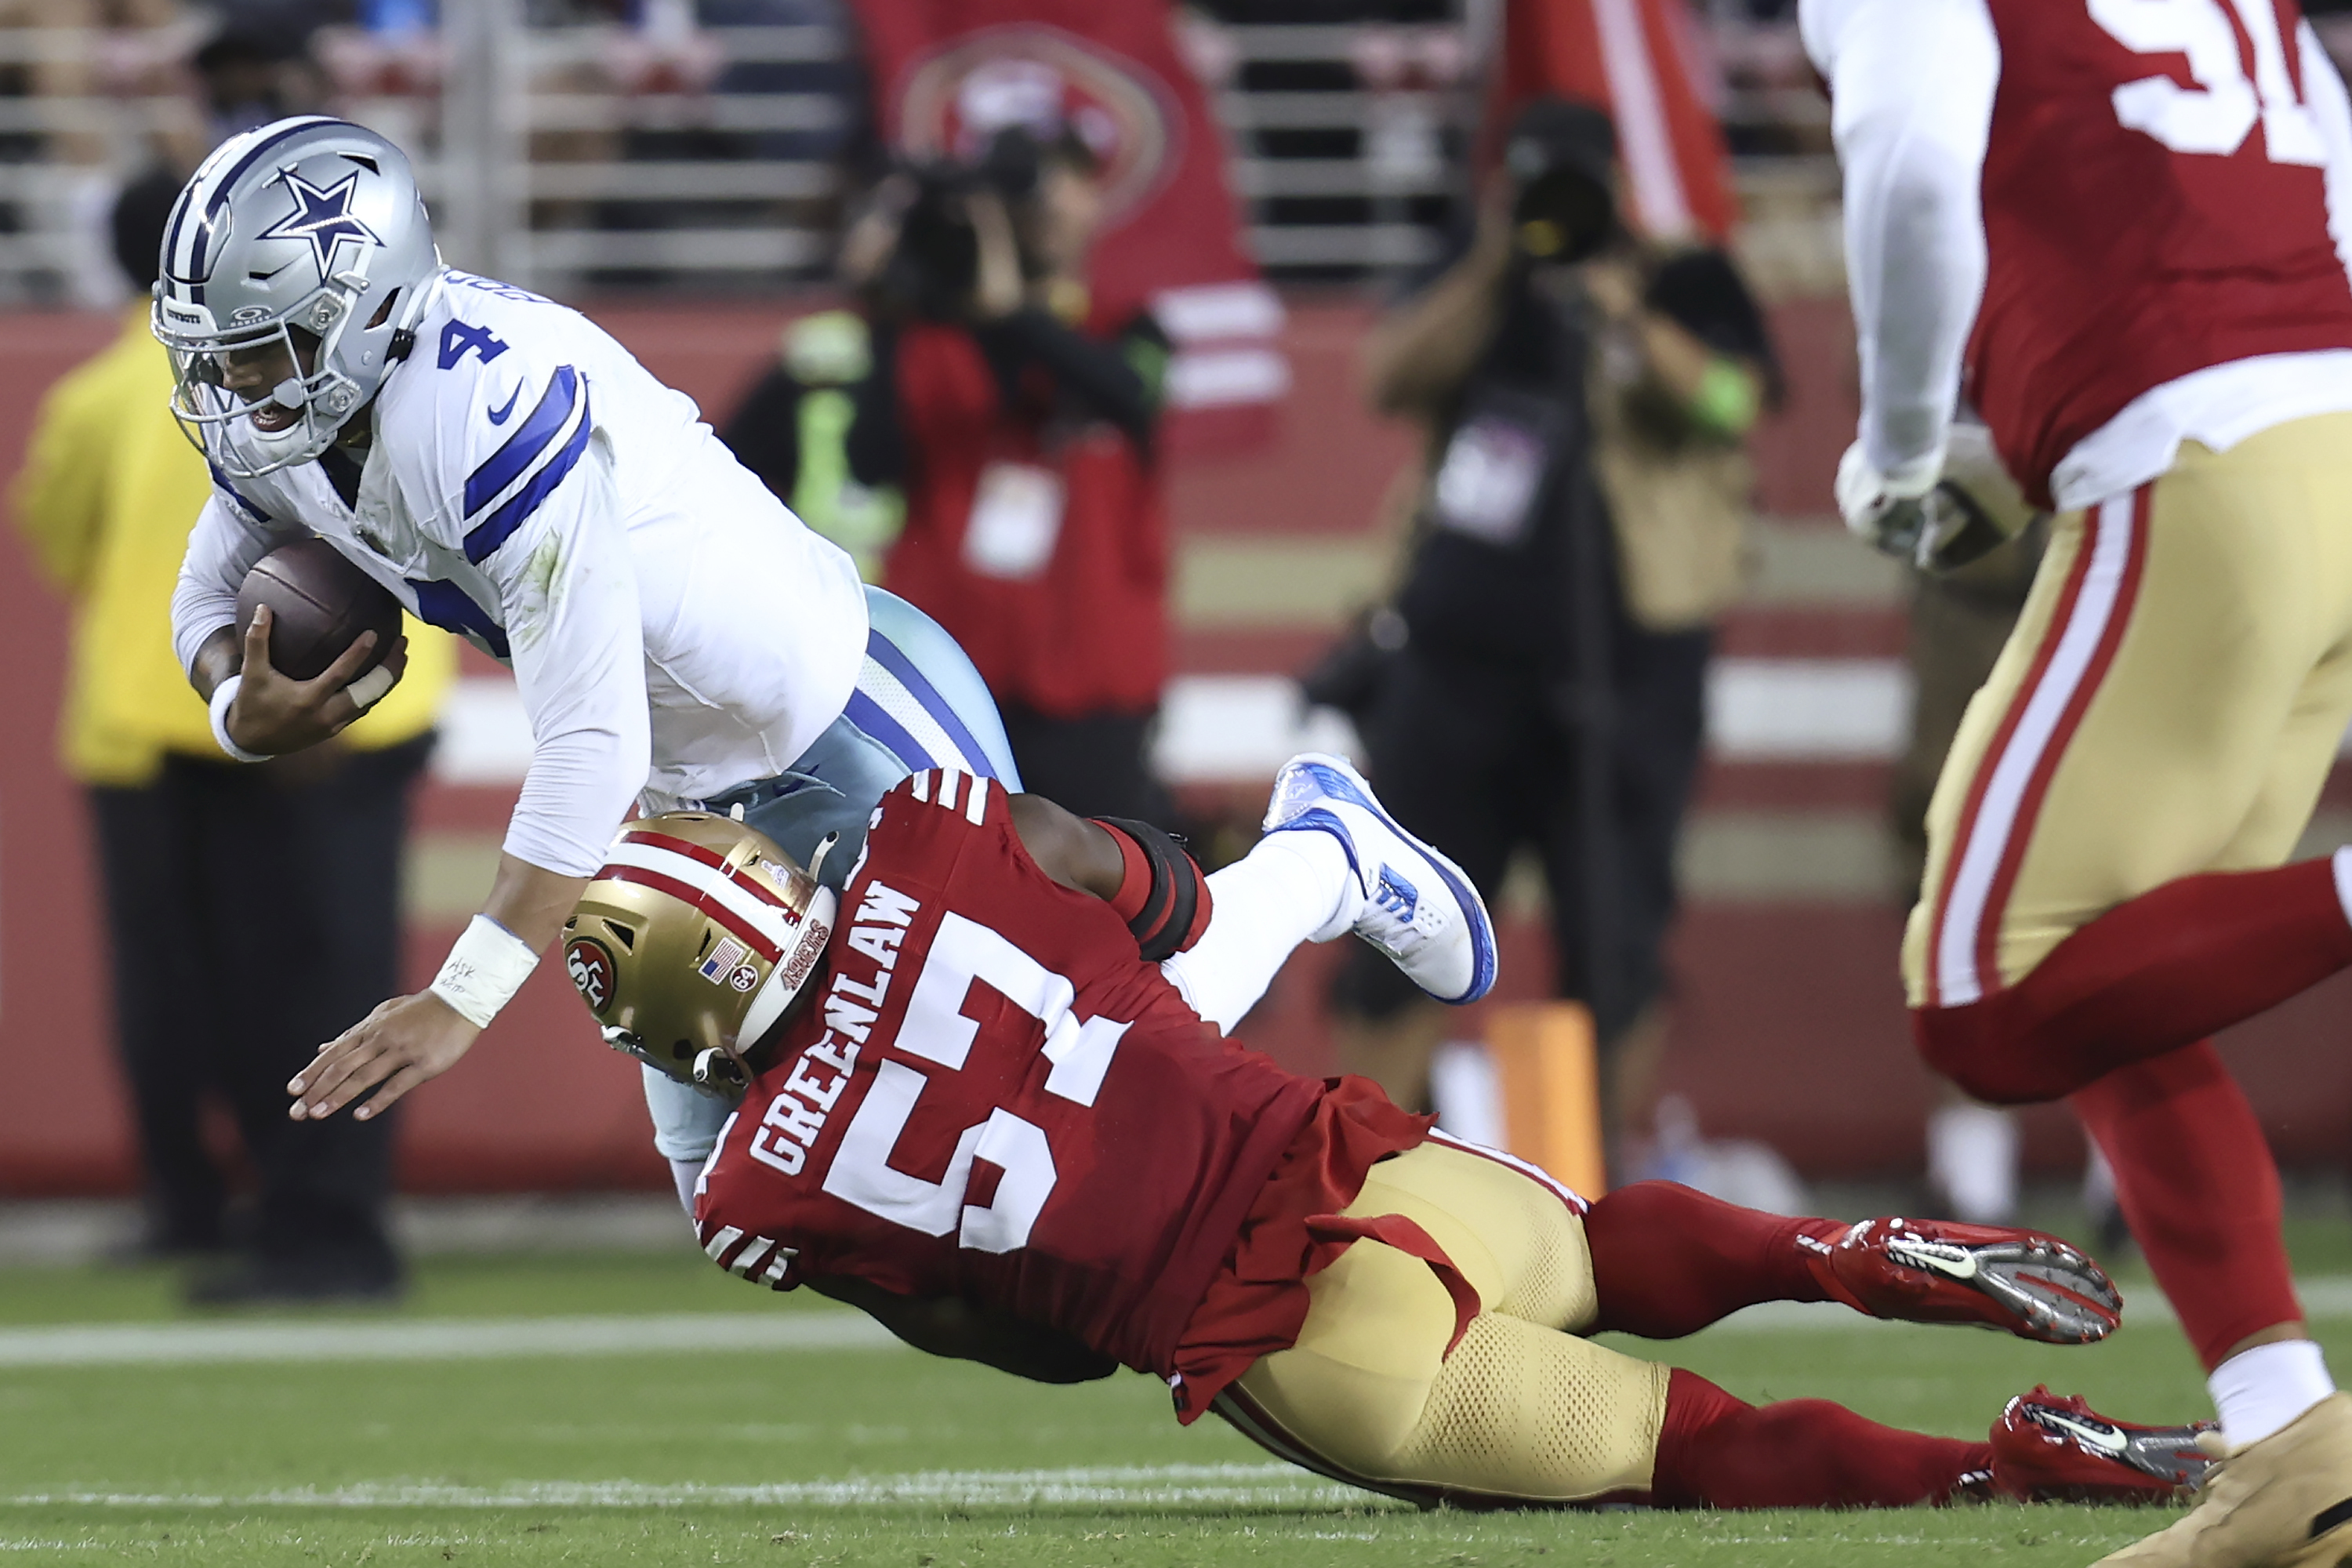 NFL Announces Cowboys-49ers For SNF on Oct. 8